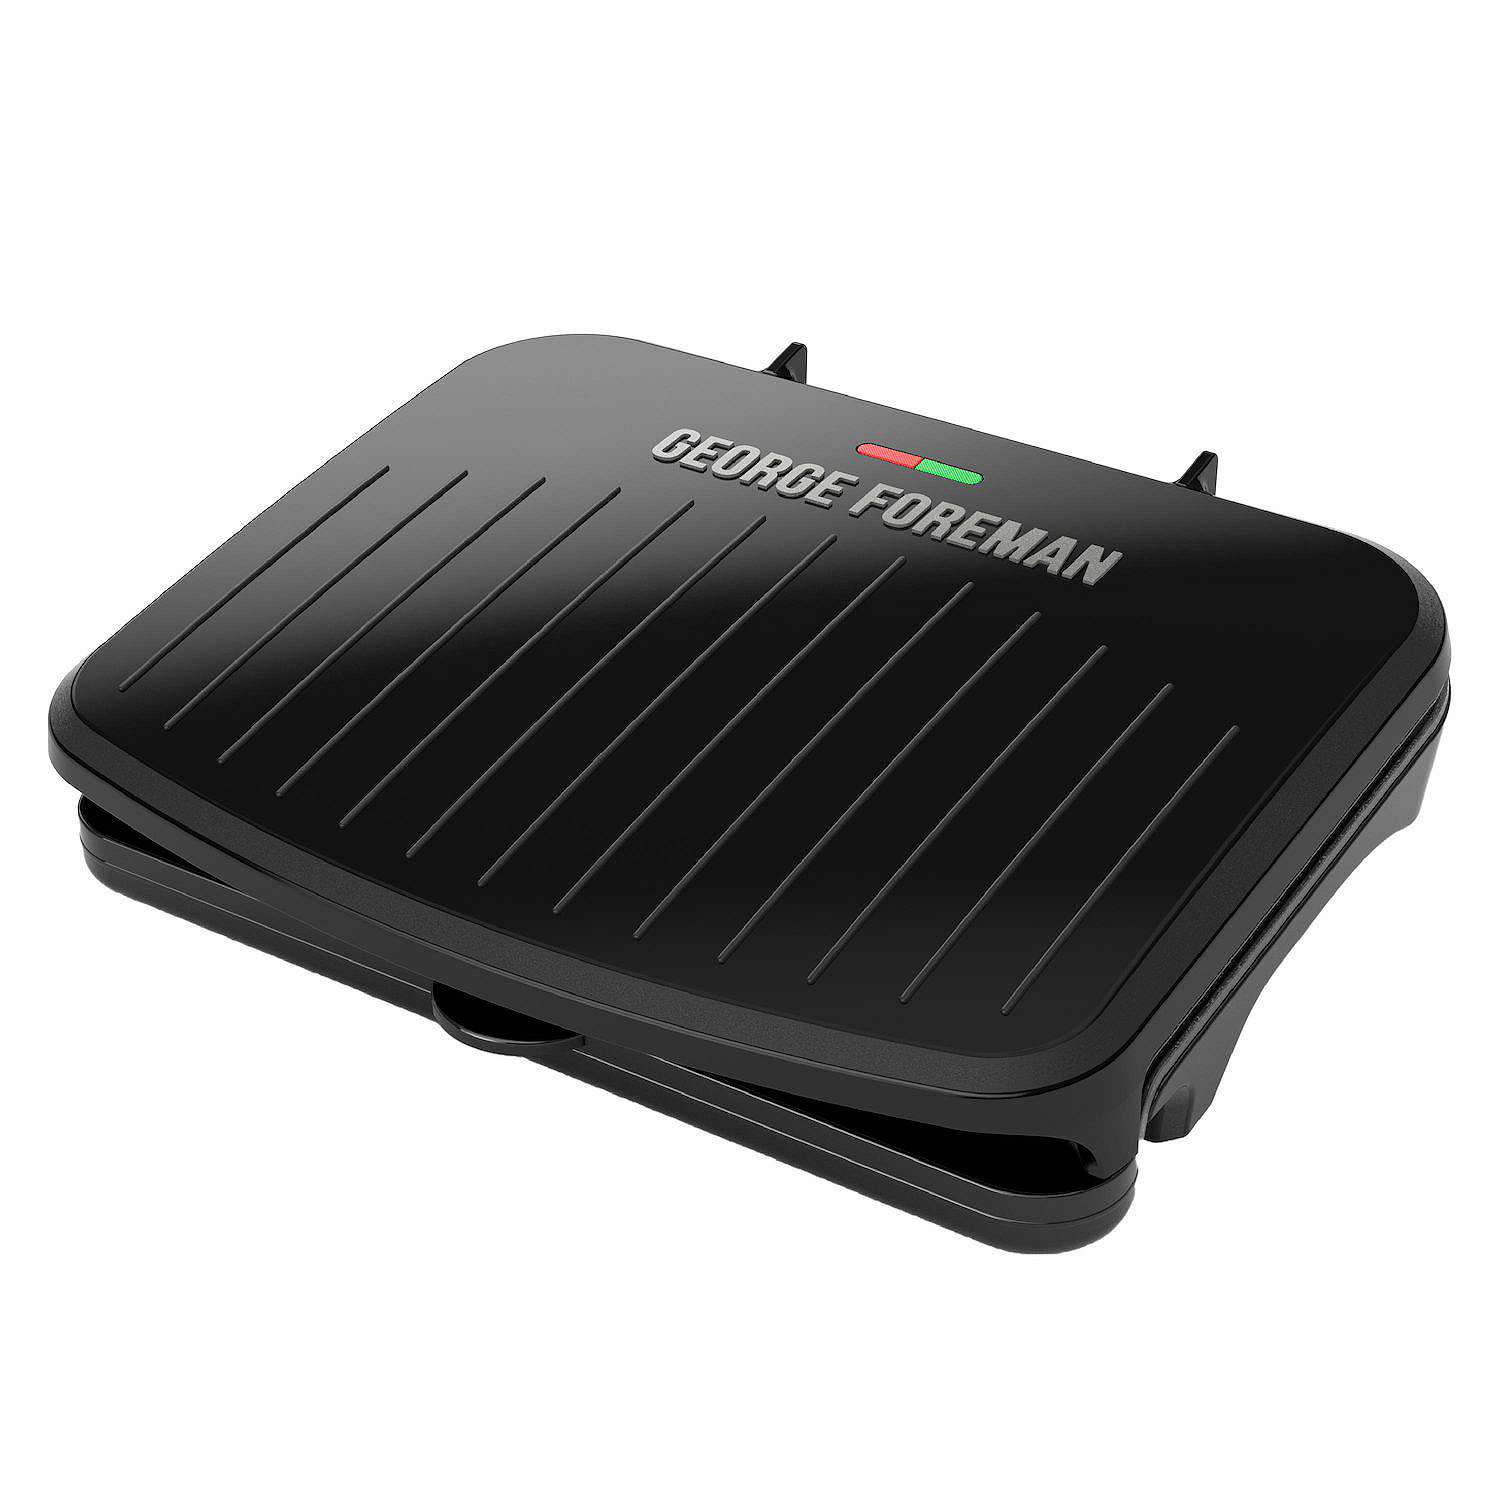 George Foreman 5-Serving Classic Plate Electric Indoor Grill & Panini Press (Black) $23.99 + Free Store Pickup at Kohl's or F/S on Orders $49+